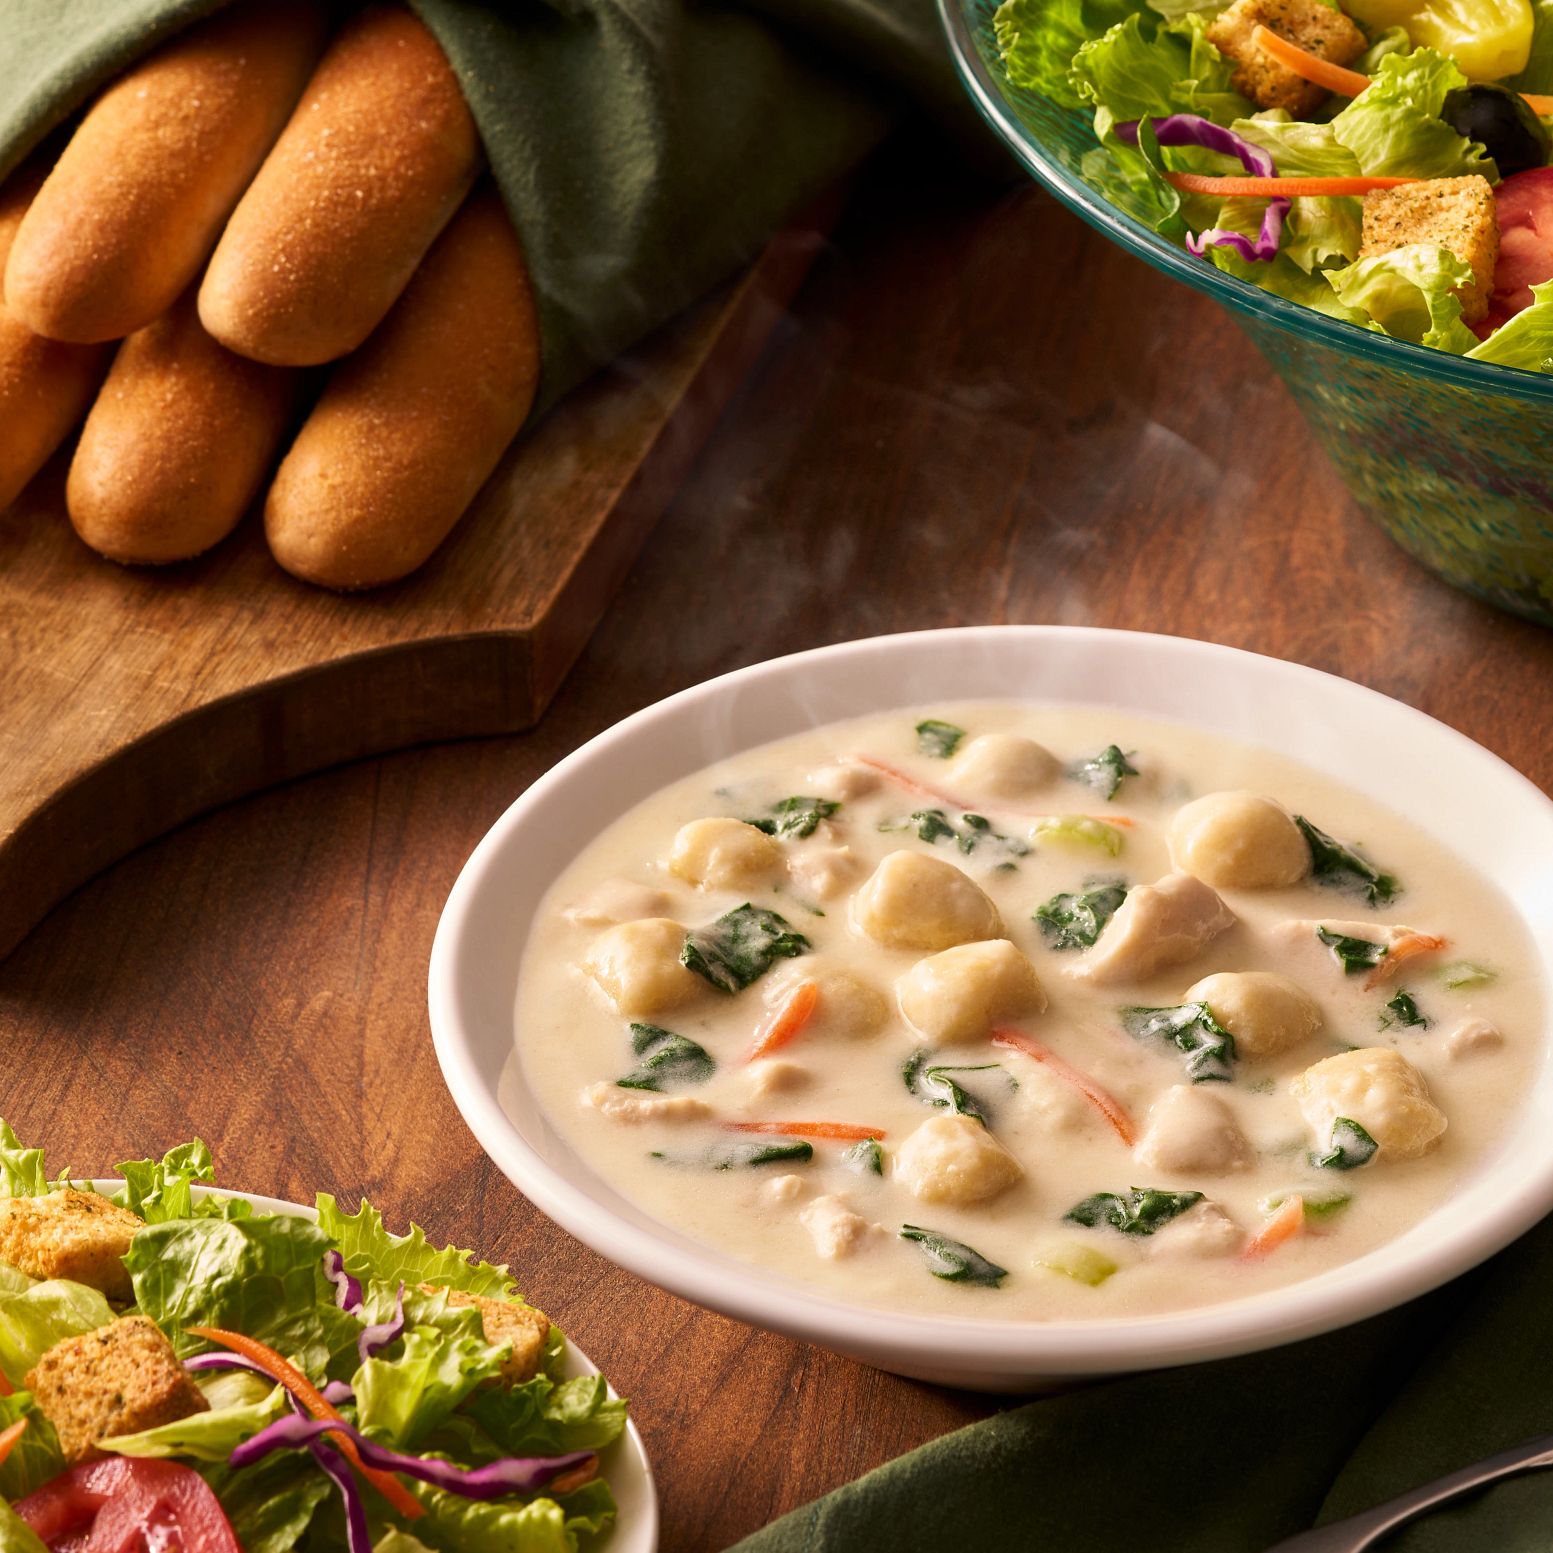 Chicken & Gnocchi: A creamy soup made with roasted chicken, Italian dumplings and spinach. Olive Garden Italian Restaurant Winnipeg (204)661-8129